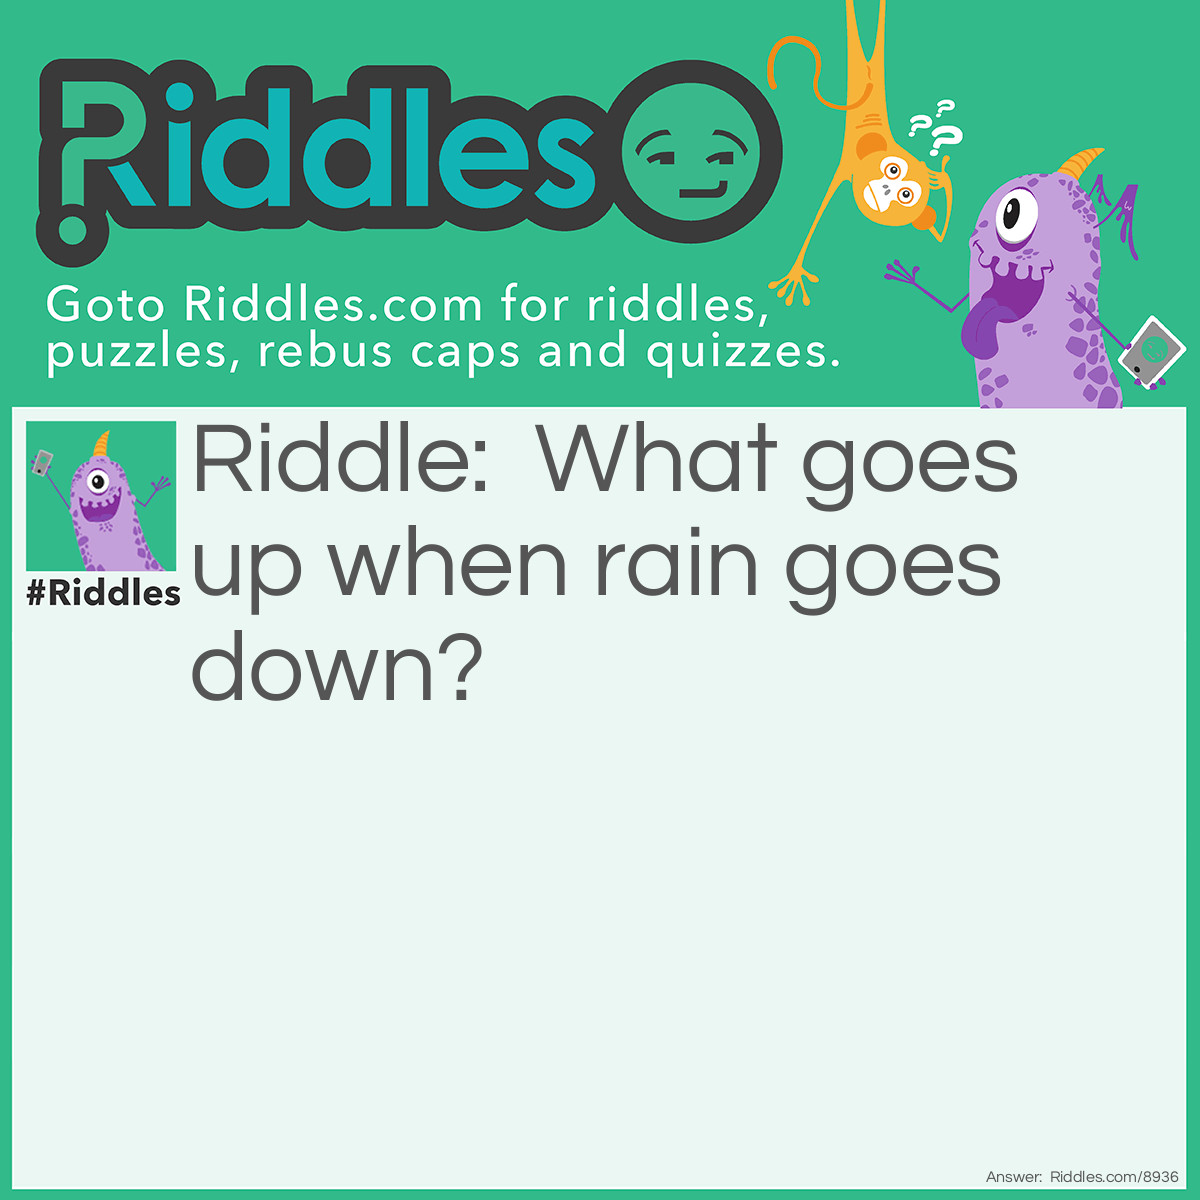 Riddle: What goes up when rain goes down? Answer: An umbrella.